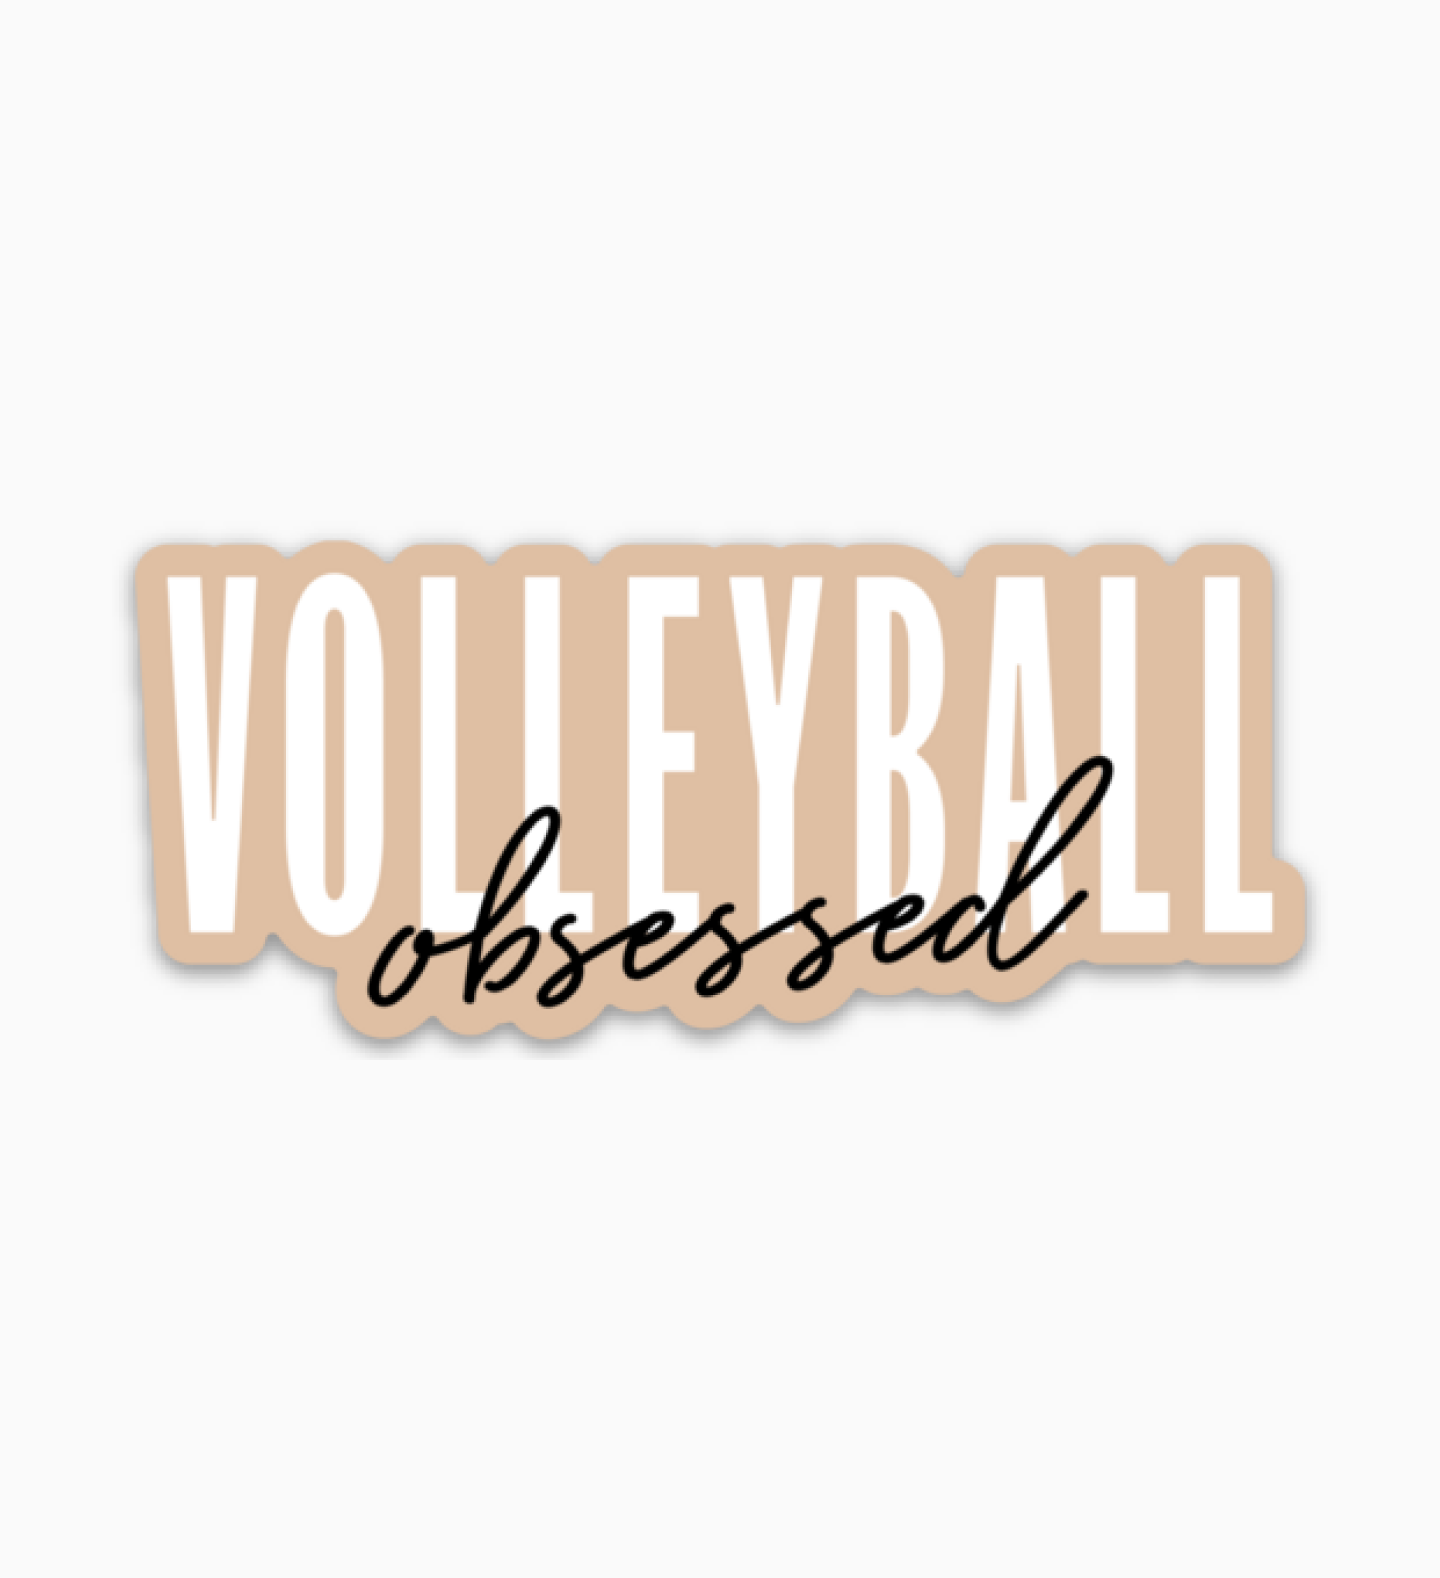 Volleyball Obsessed Sticker